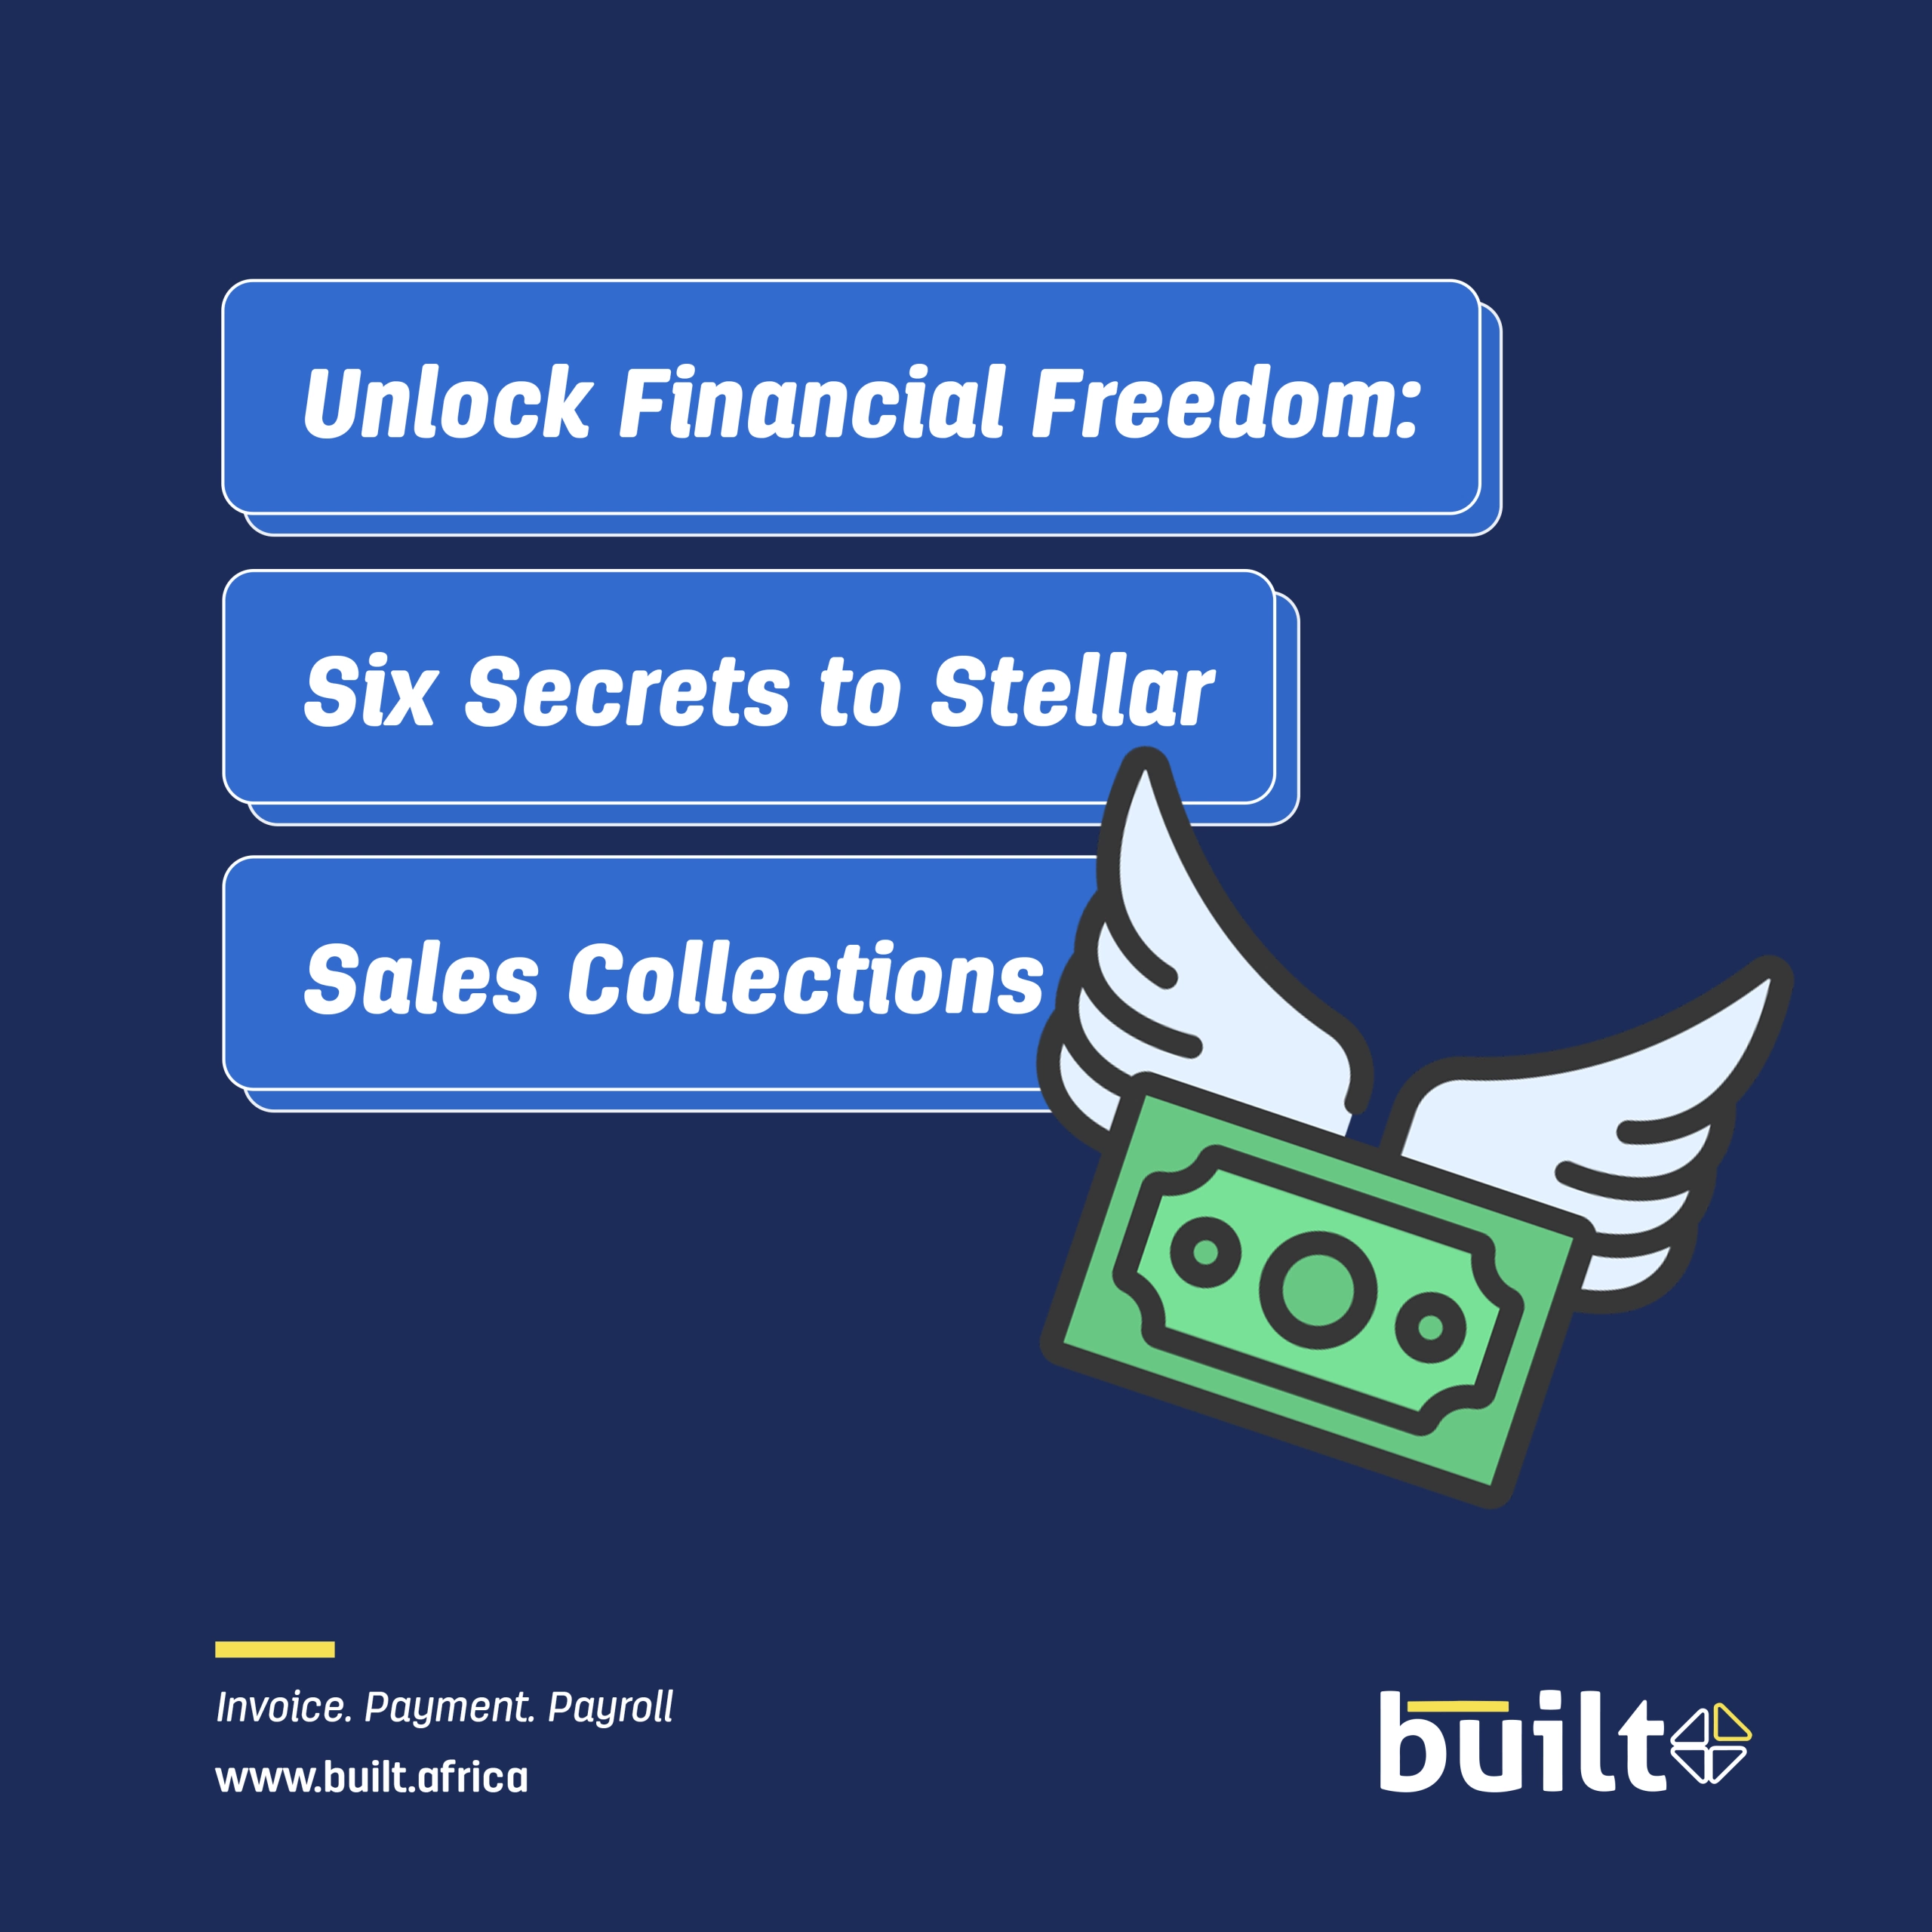 Unlock Financial Freedom: Six Secrets to Stellar Sales Collections